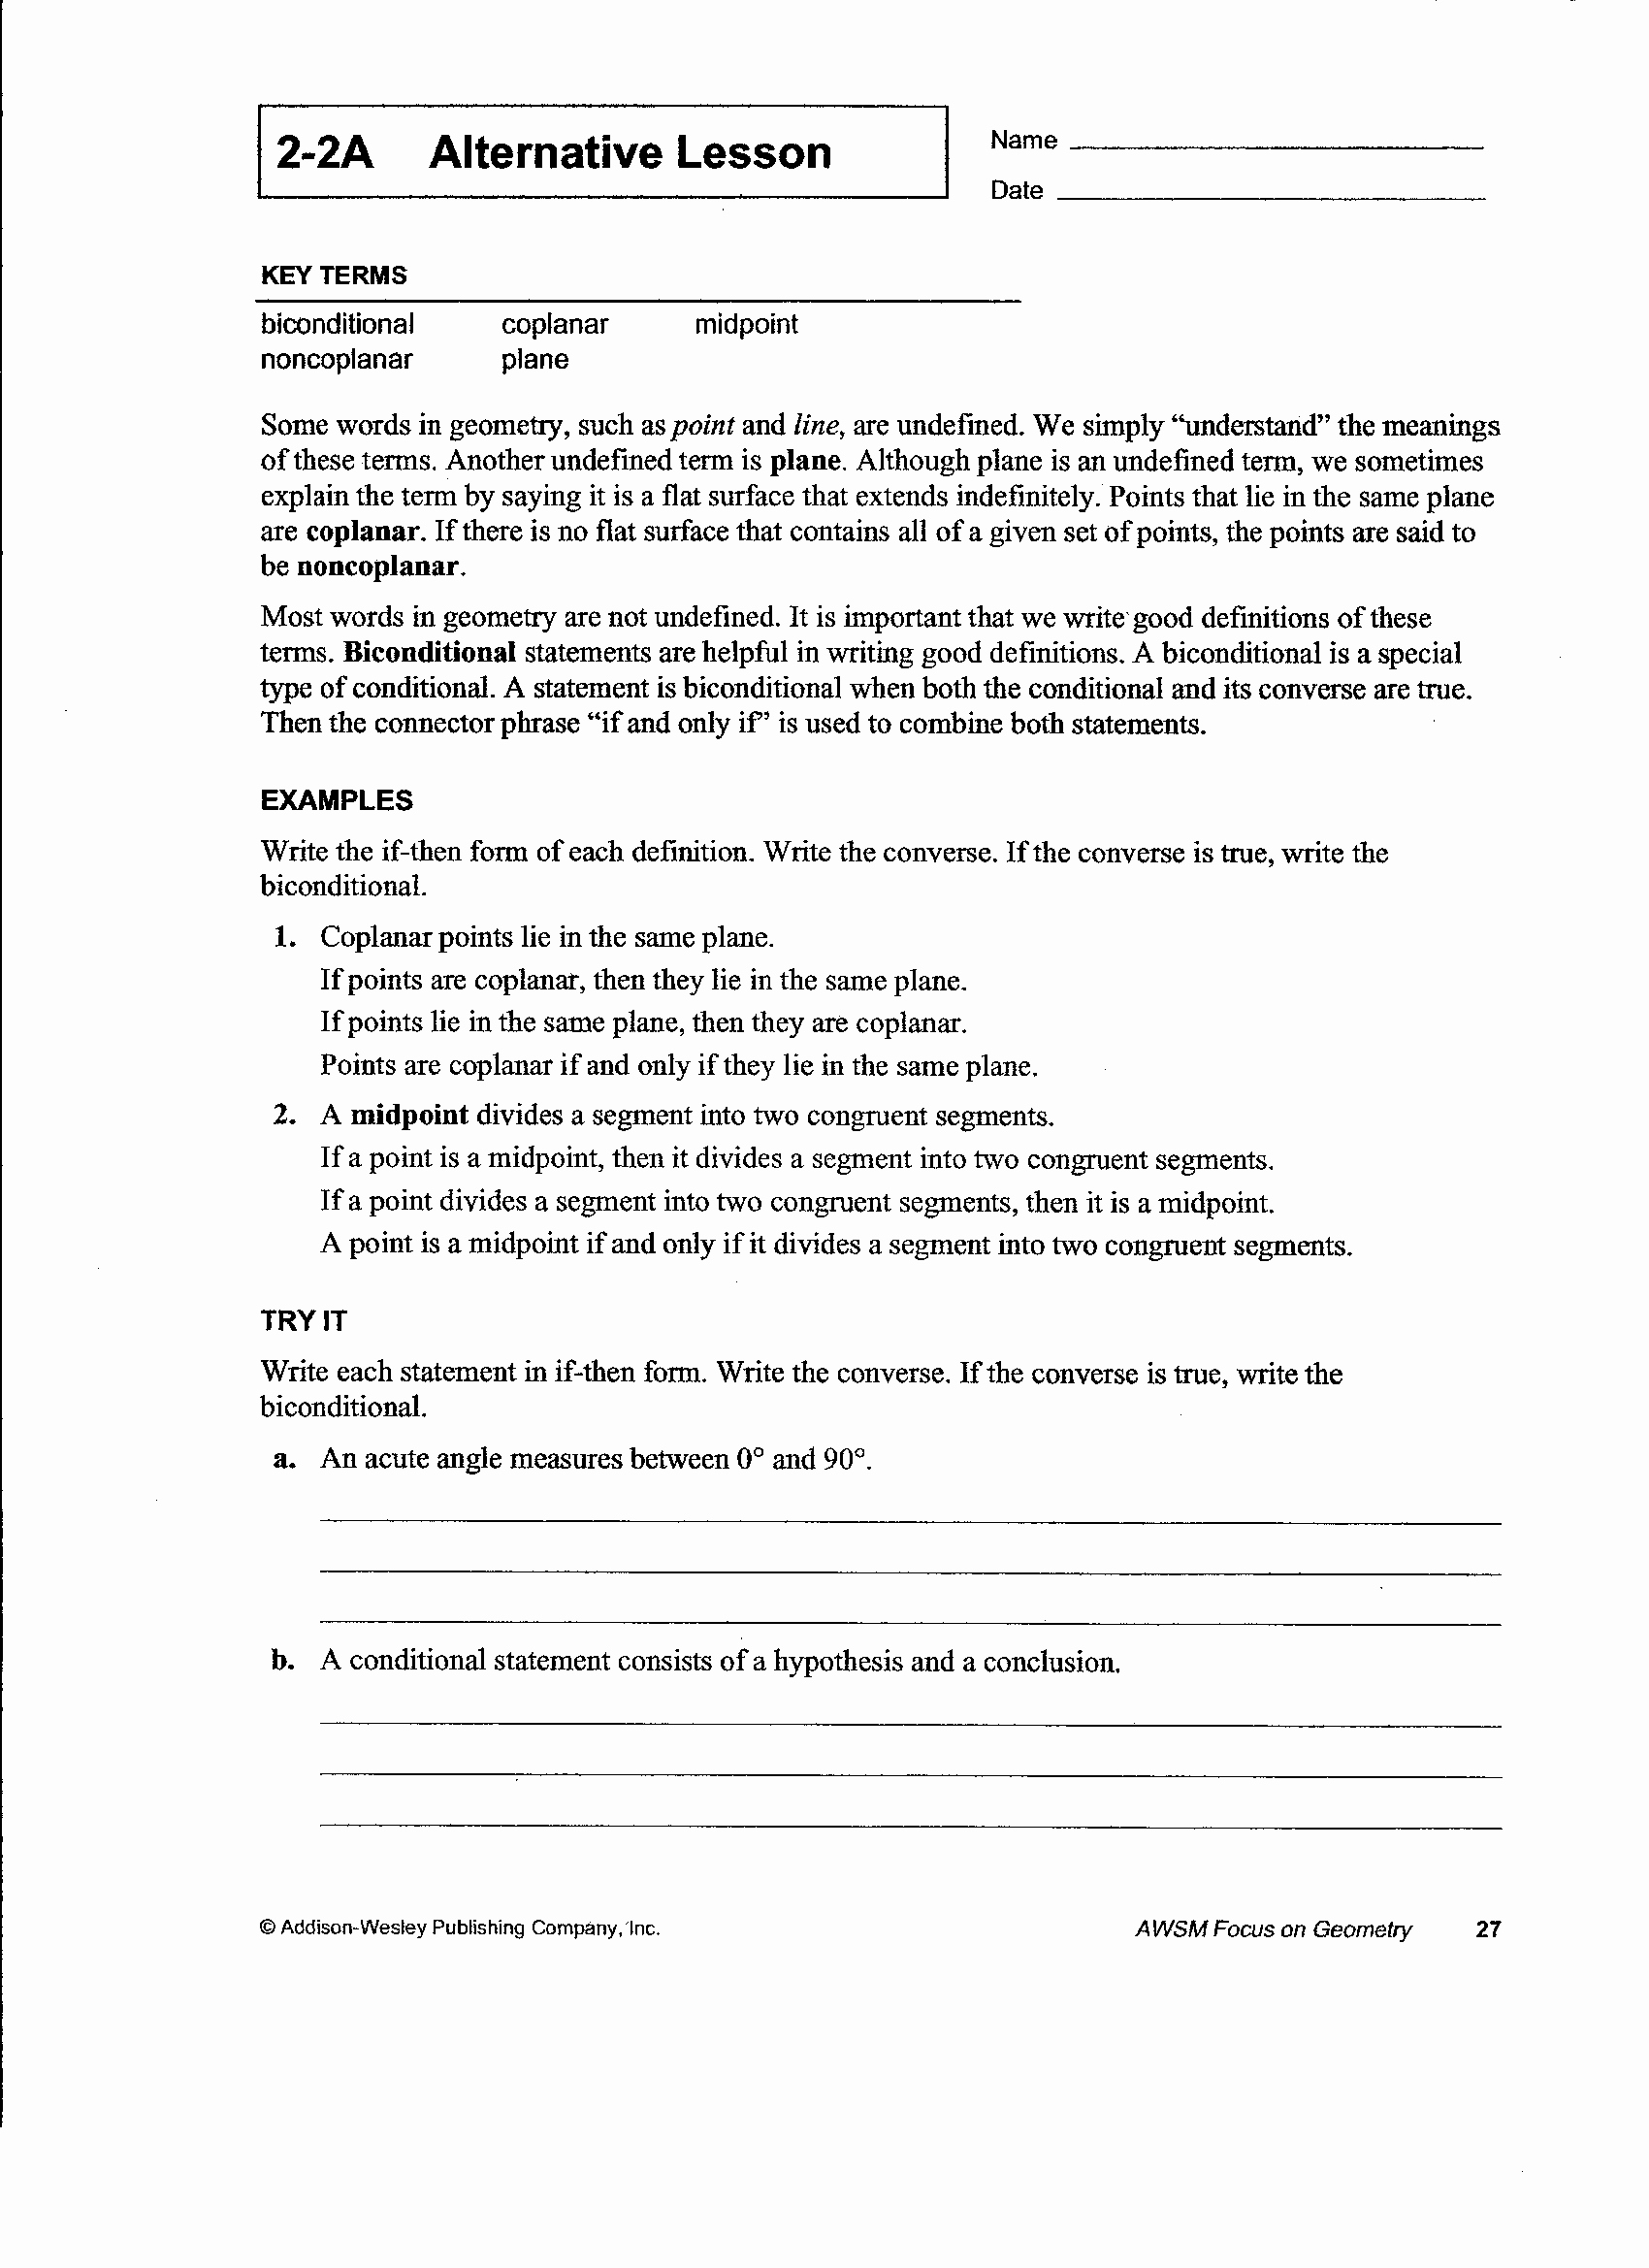 Inductive and Deductive Reasoning Worksheet Unique Inductive Deductive Reasoning Worksheets the Best